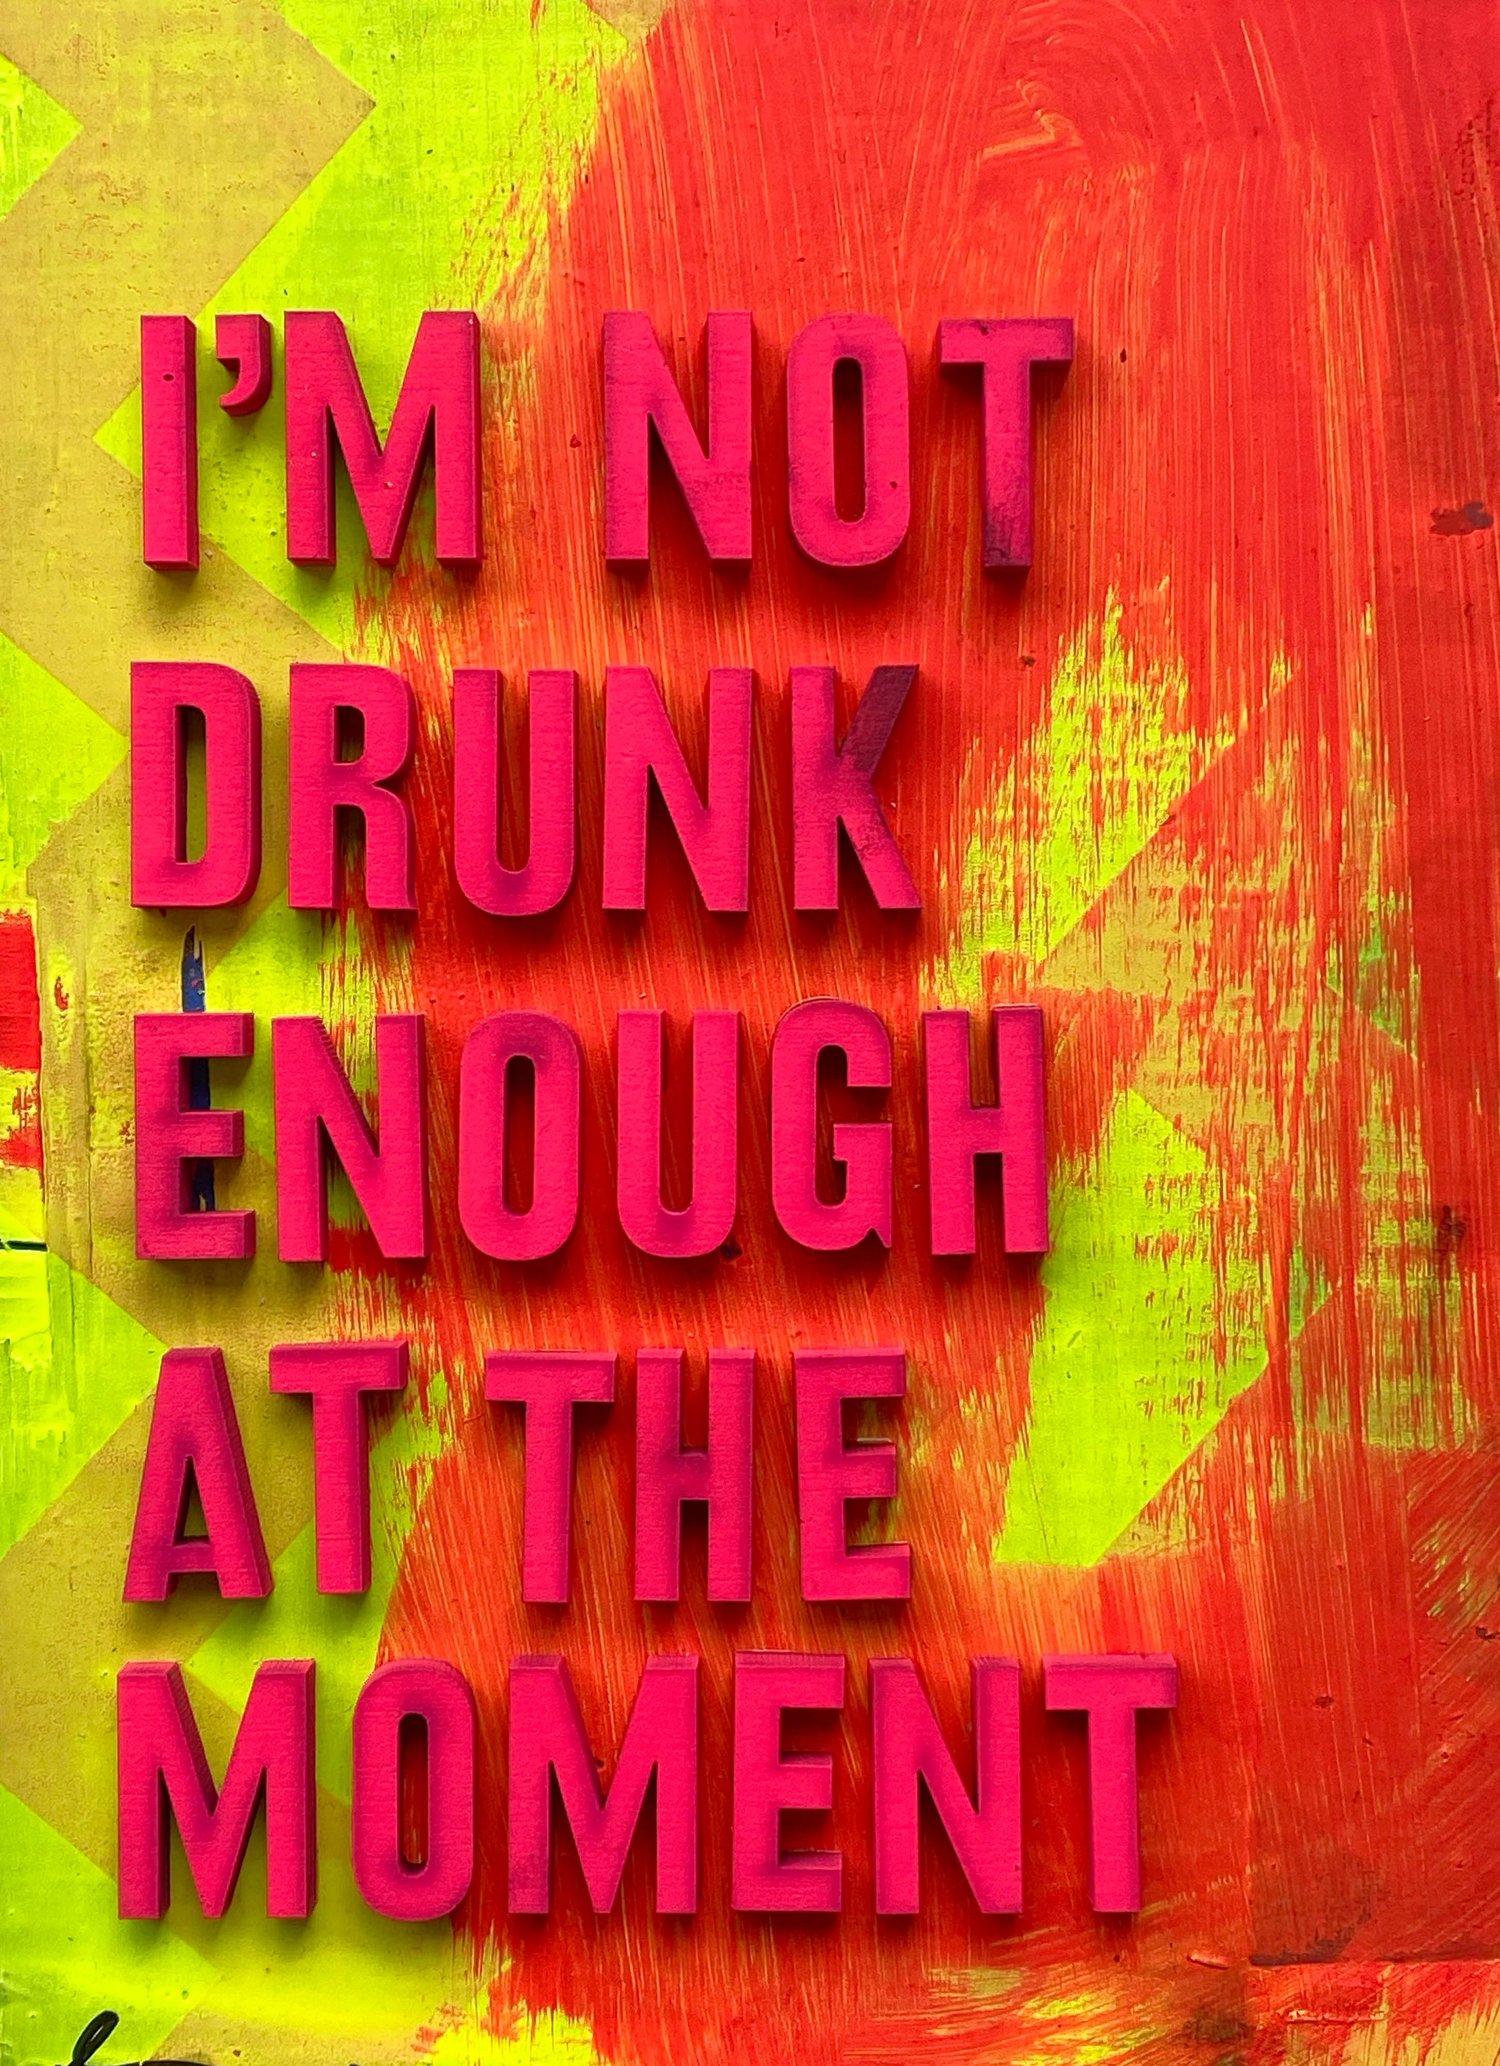 Image of 'I'm not drunk enough at the moment' by Hackney Dave